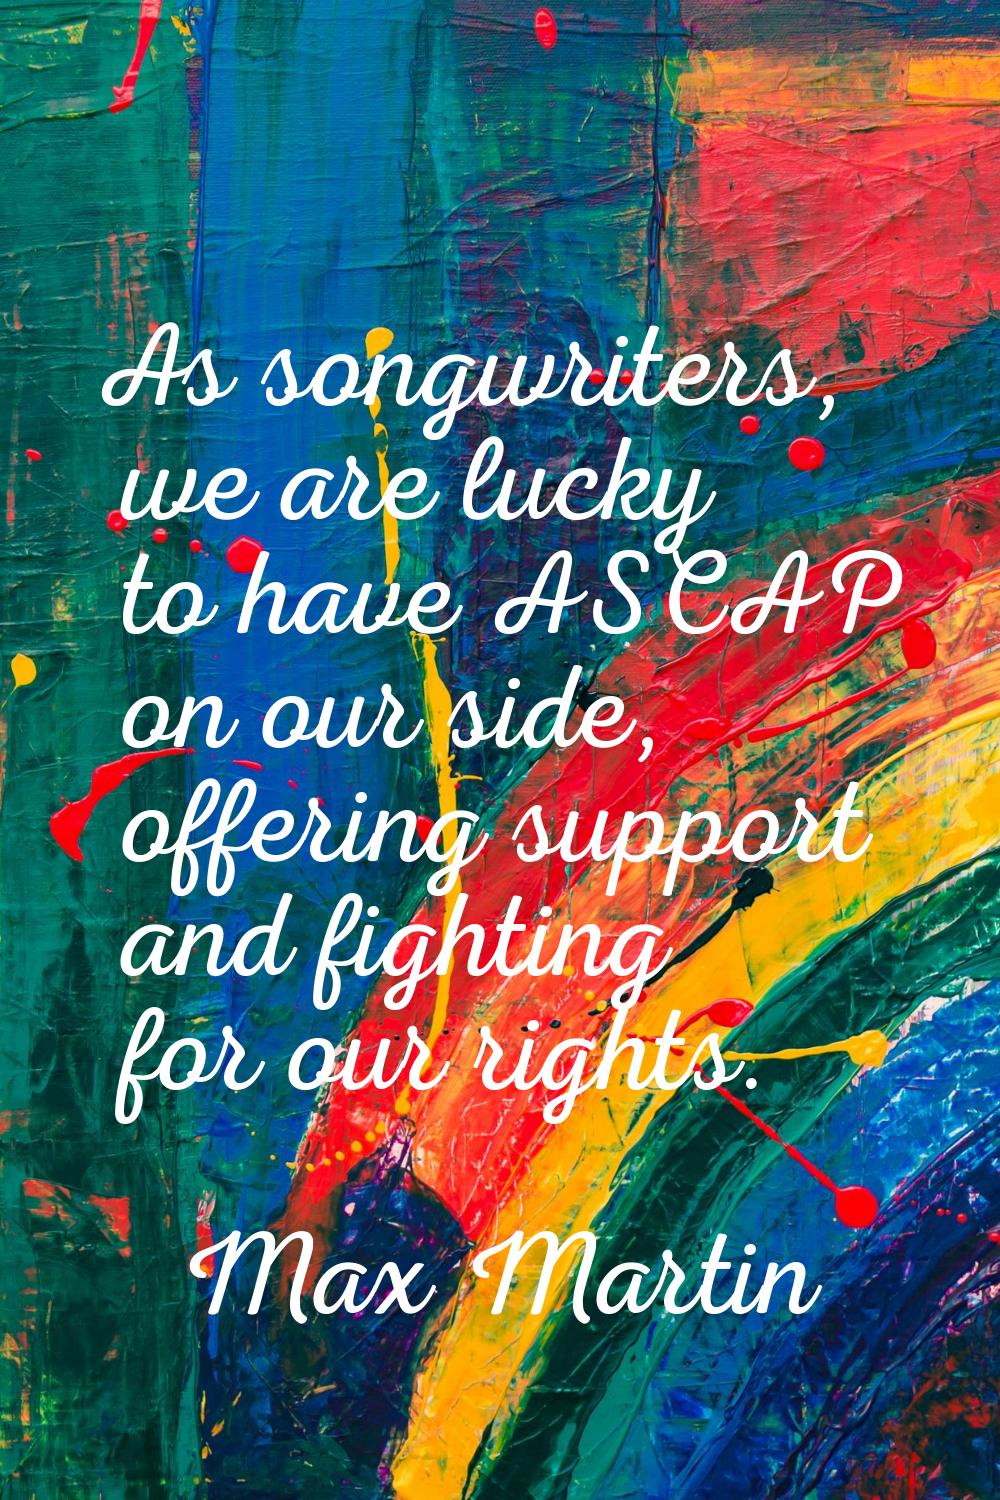 As songwriters, we are lucky to have ASCAP on our side, offering support and fighting for our right